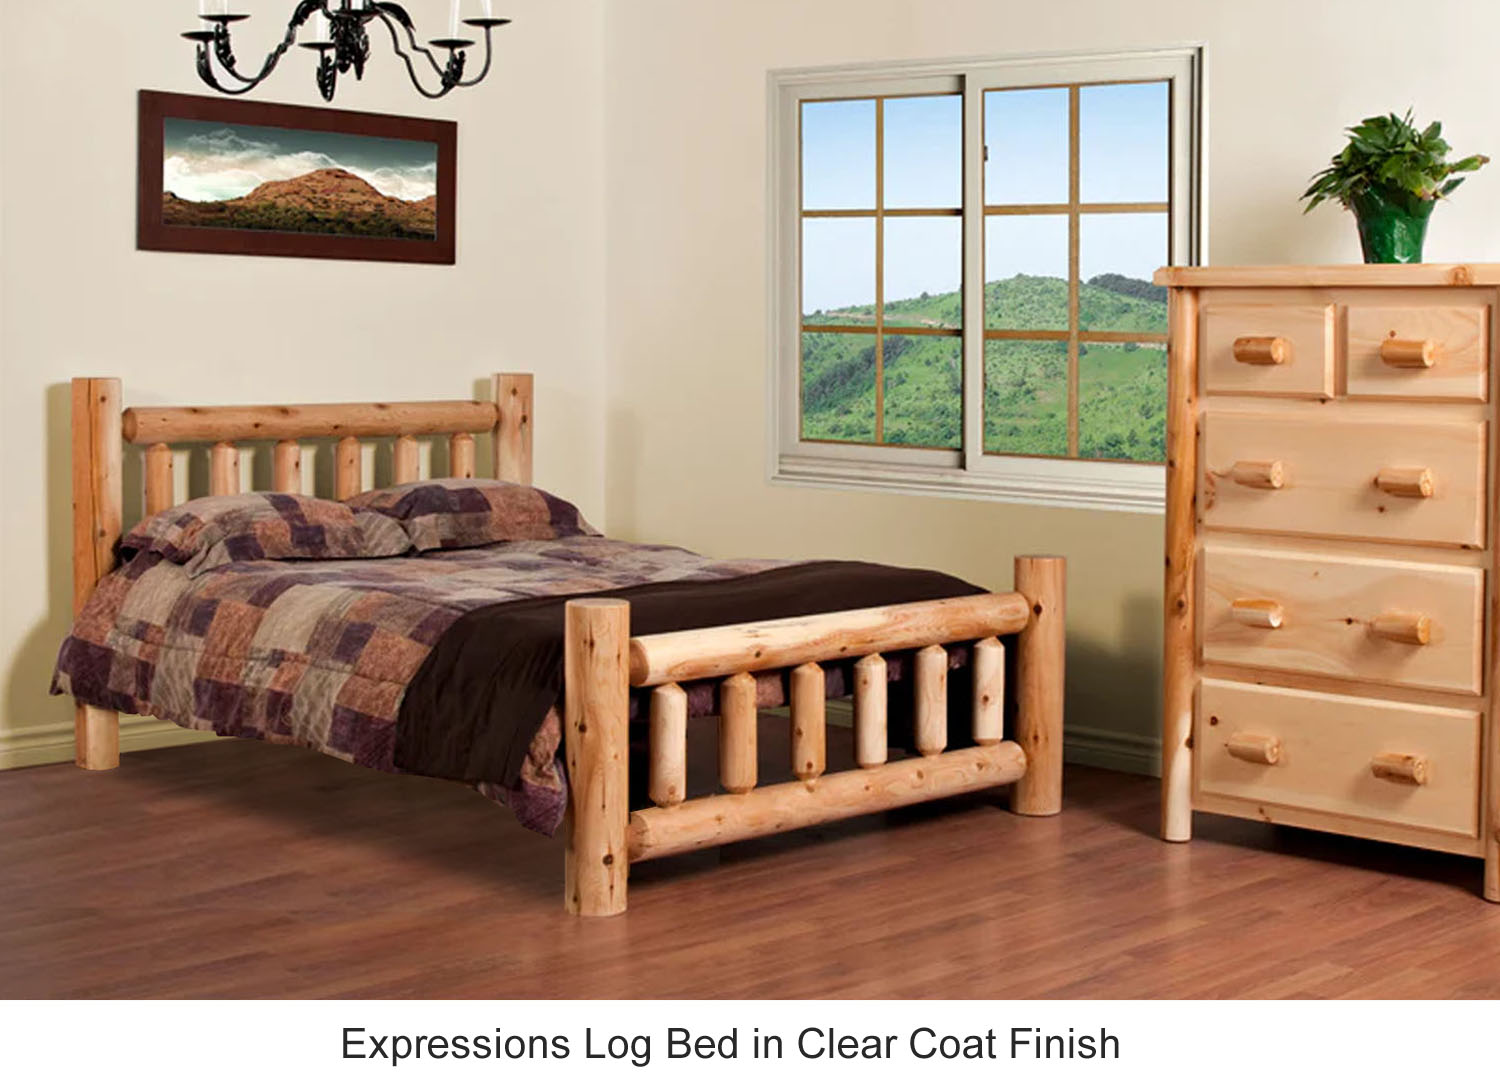 Expressions Log Bed in Clear Coat Finish